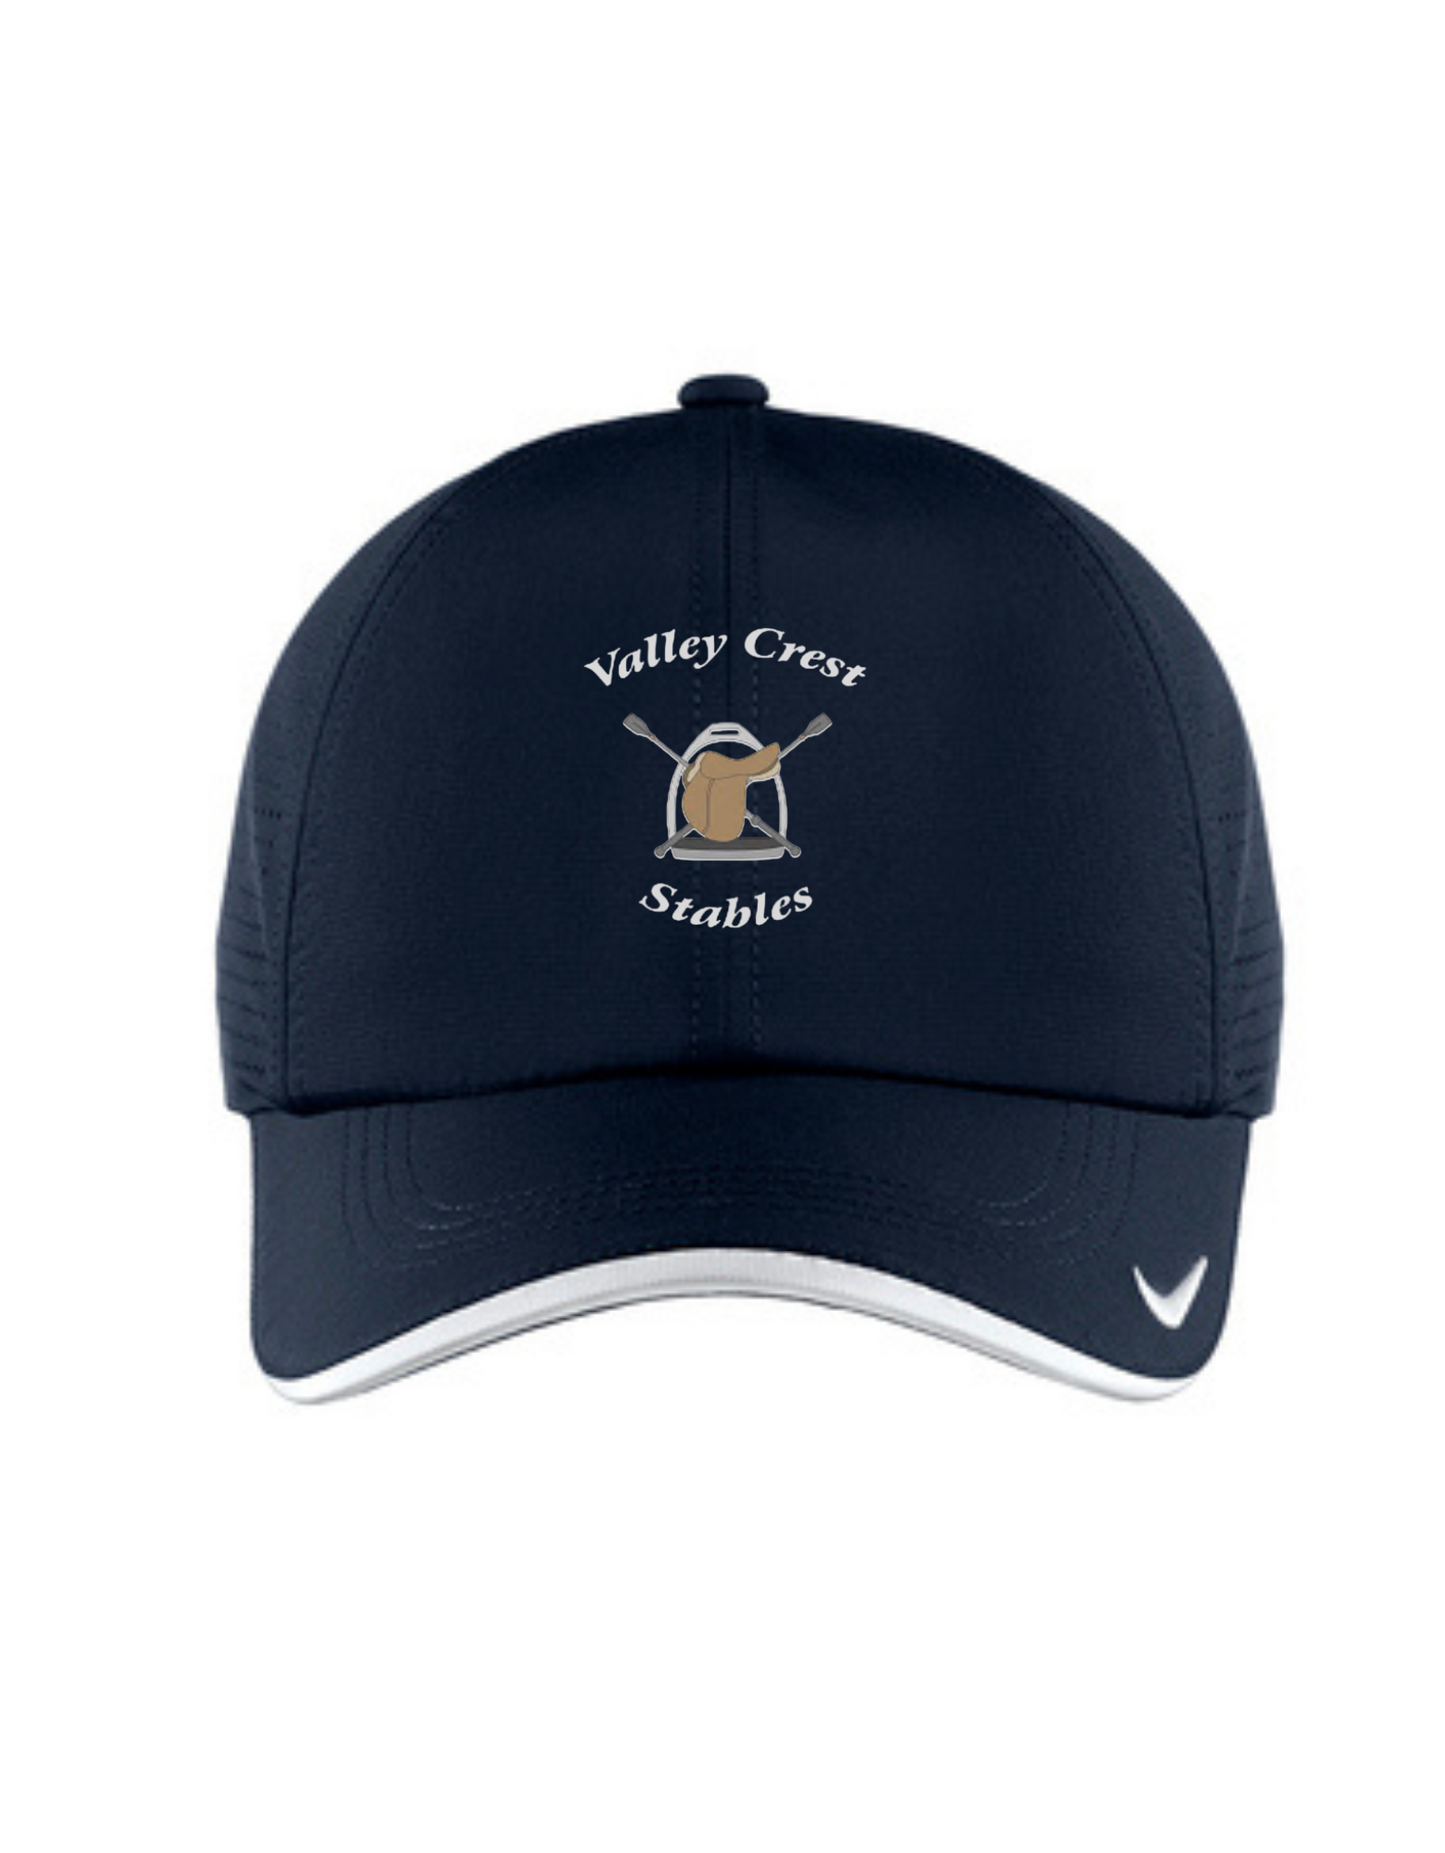 Valley Crest Stables - Nike Dri-FIT Swoosh Perforated Cap